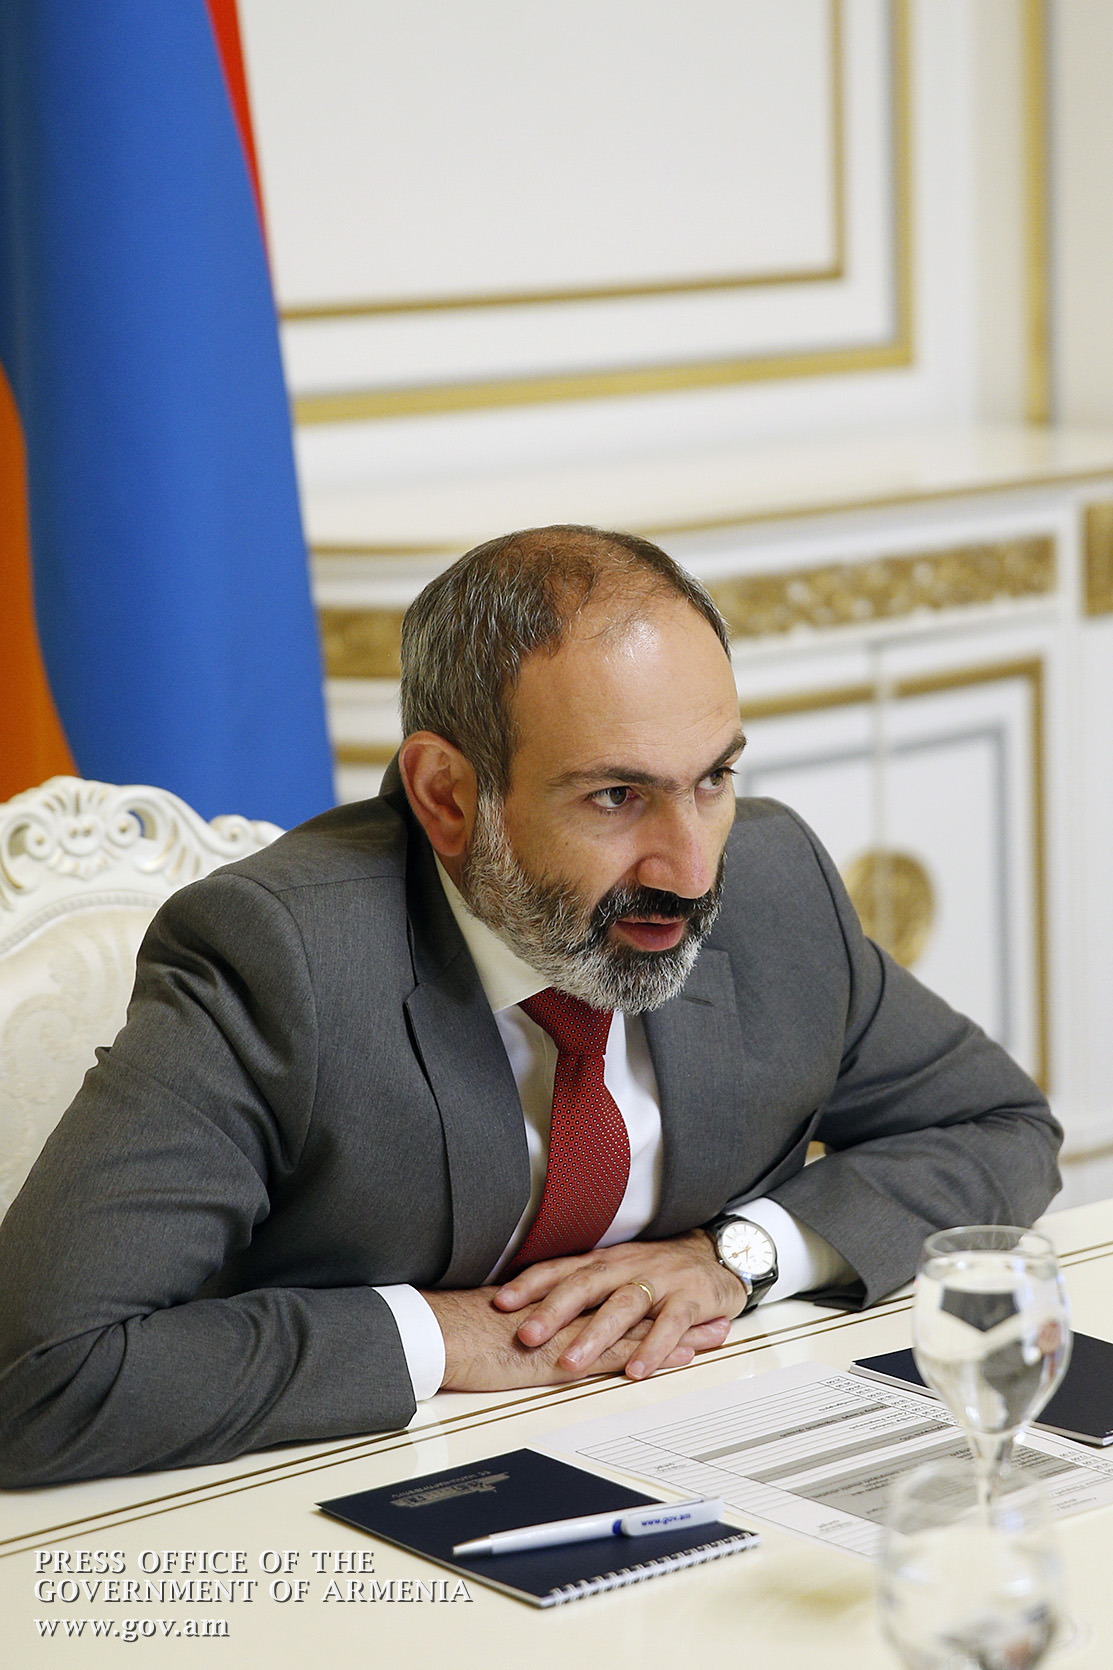 Nikol Pashinyan: ‘We see good prospects in agriculture that need to be effectively implemented’